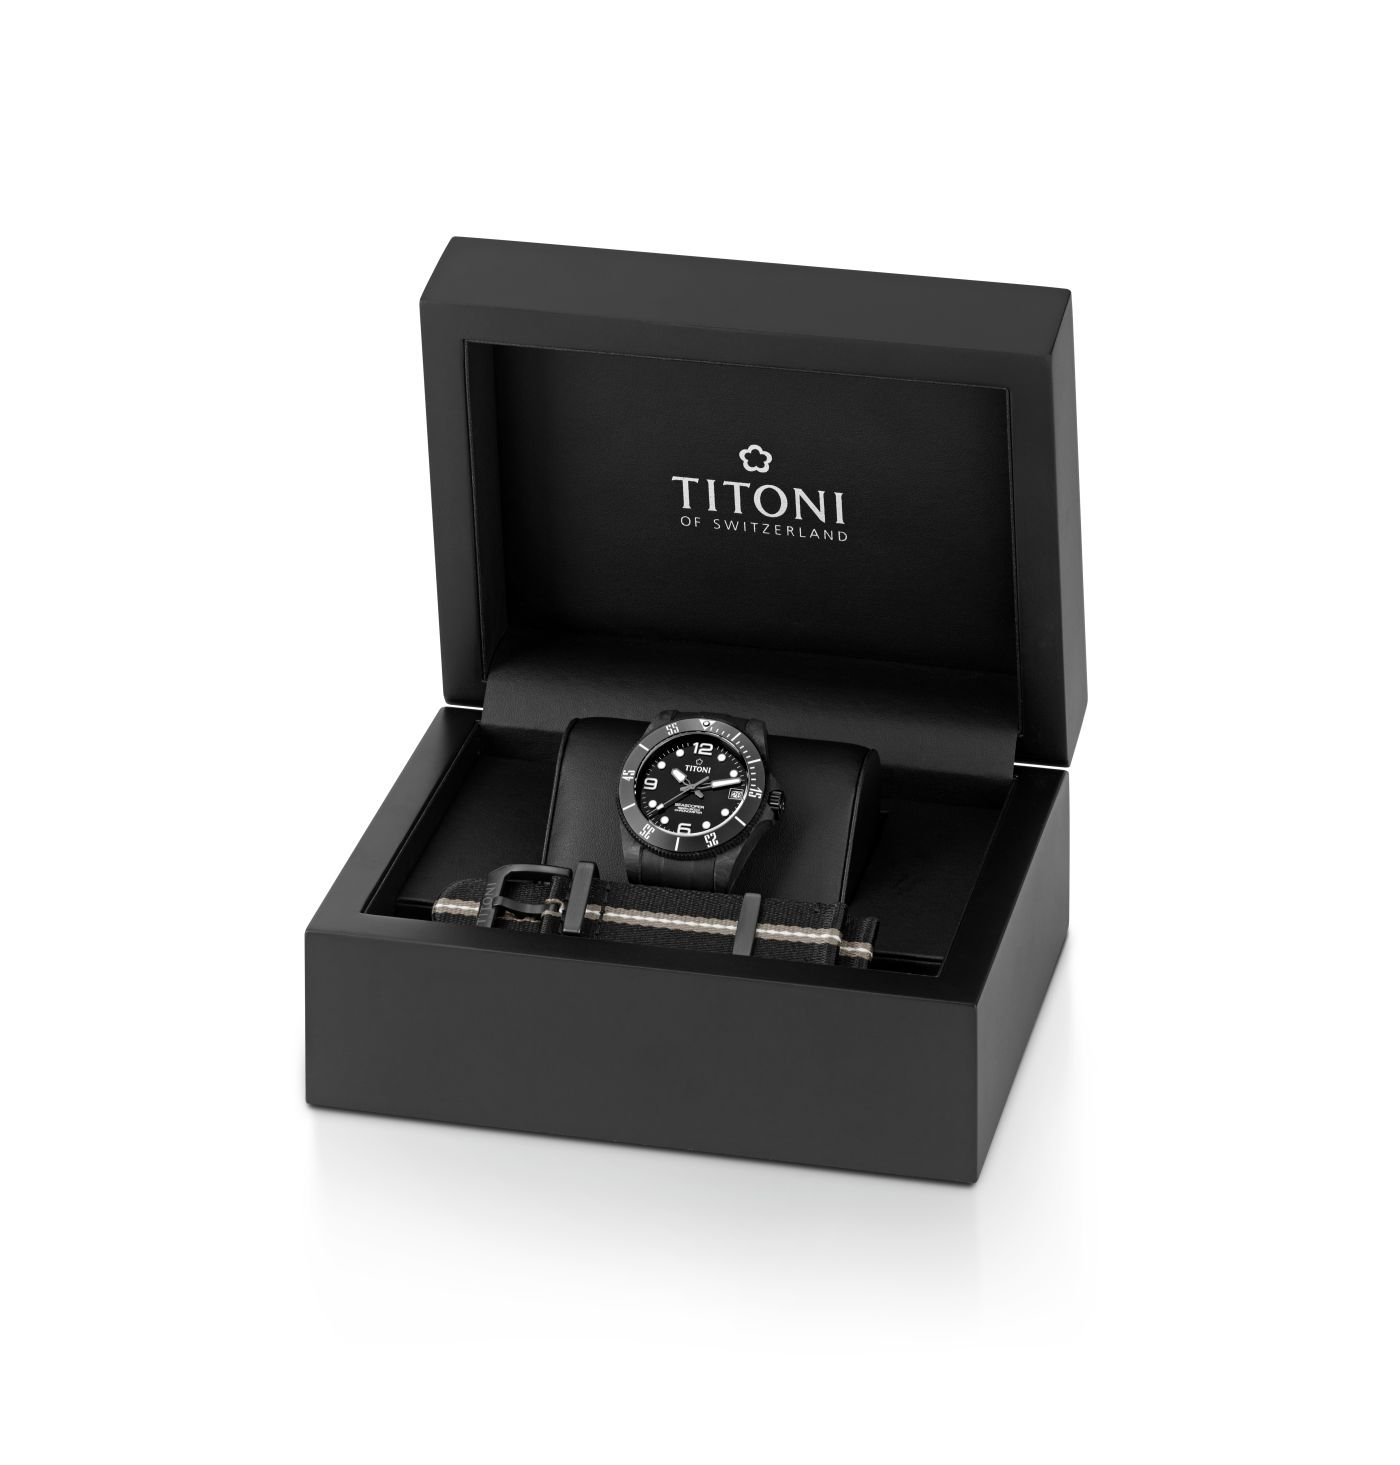 Titoni unveils its first-ever carbon watch